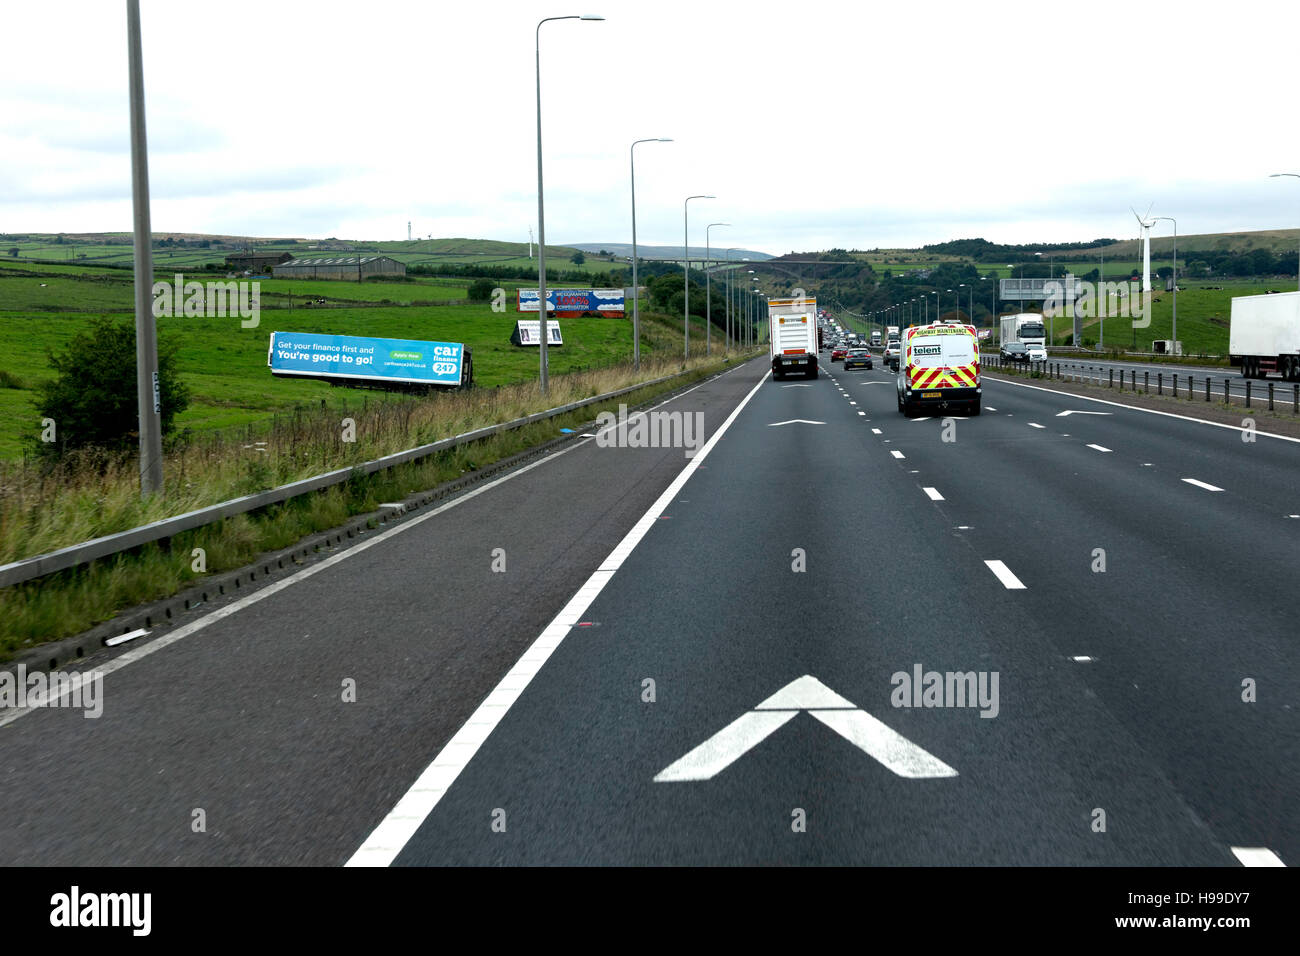 View from inside lane of UK motorway, showing vehicle distance chevron markers. Stock Photo